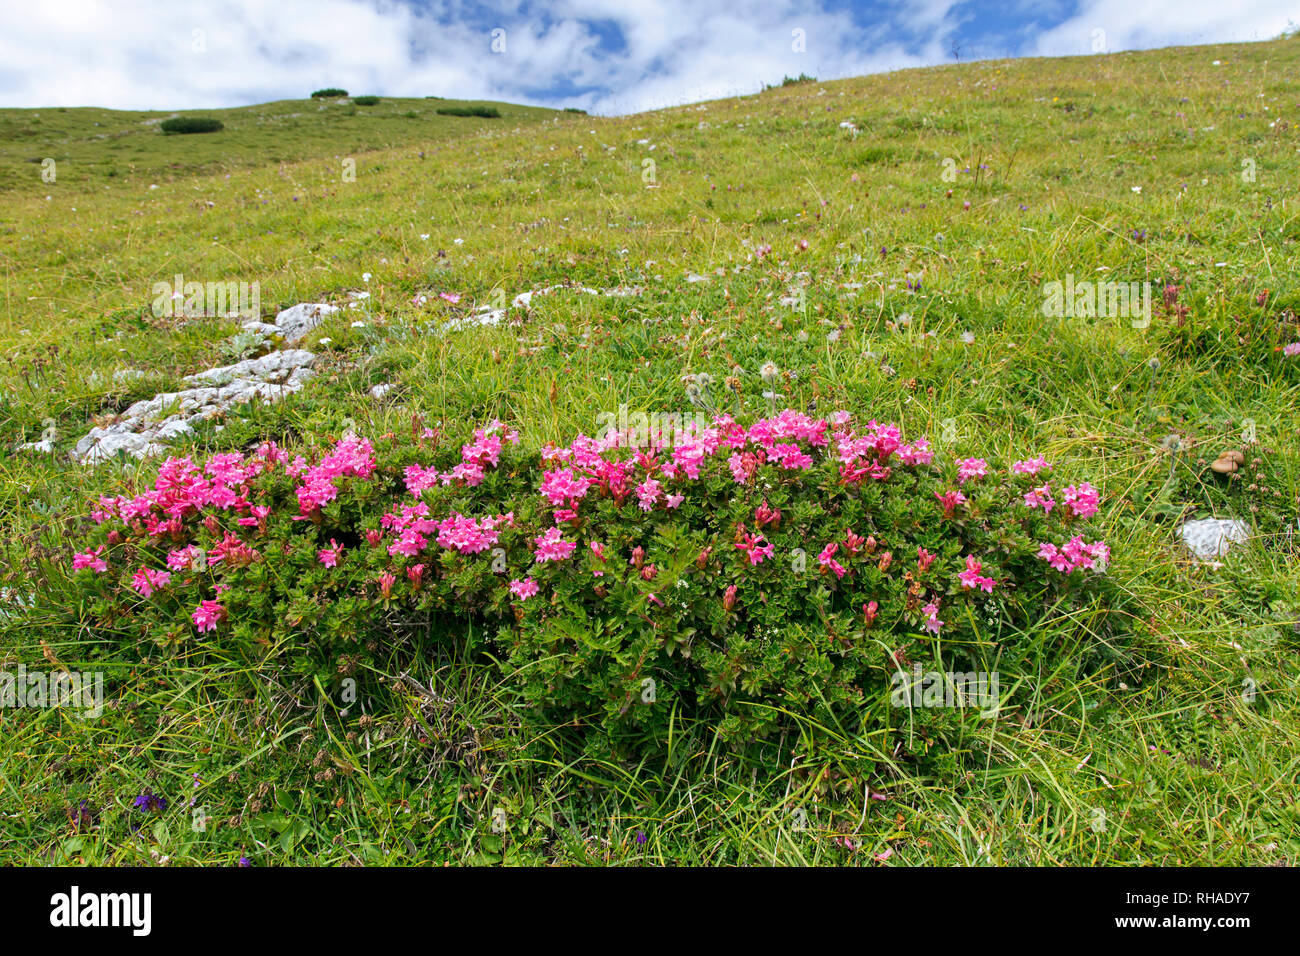 Snow-rose / rusty-leaved alpenrose (Rhododendron ferrugineum) in flower, Hohe Tauern National Park, Carinthia, Austria Stock Photo